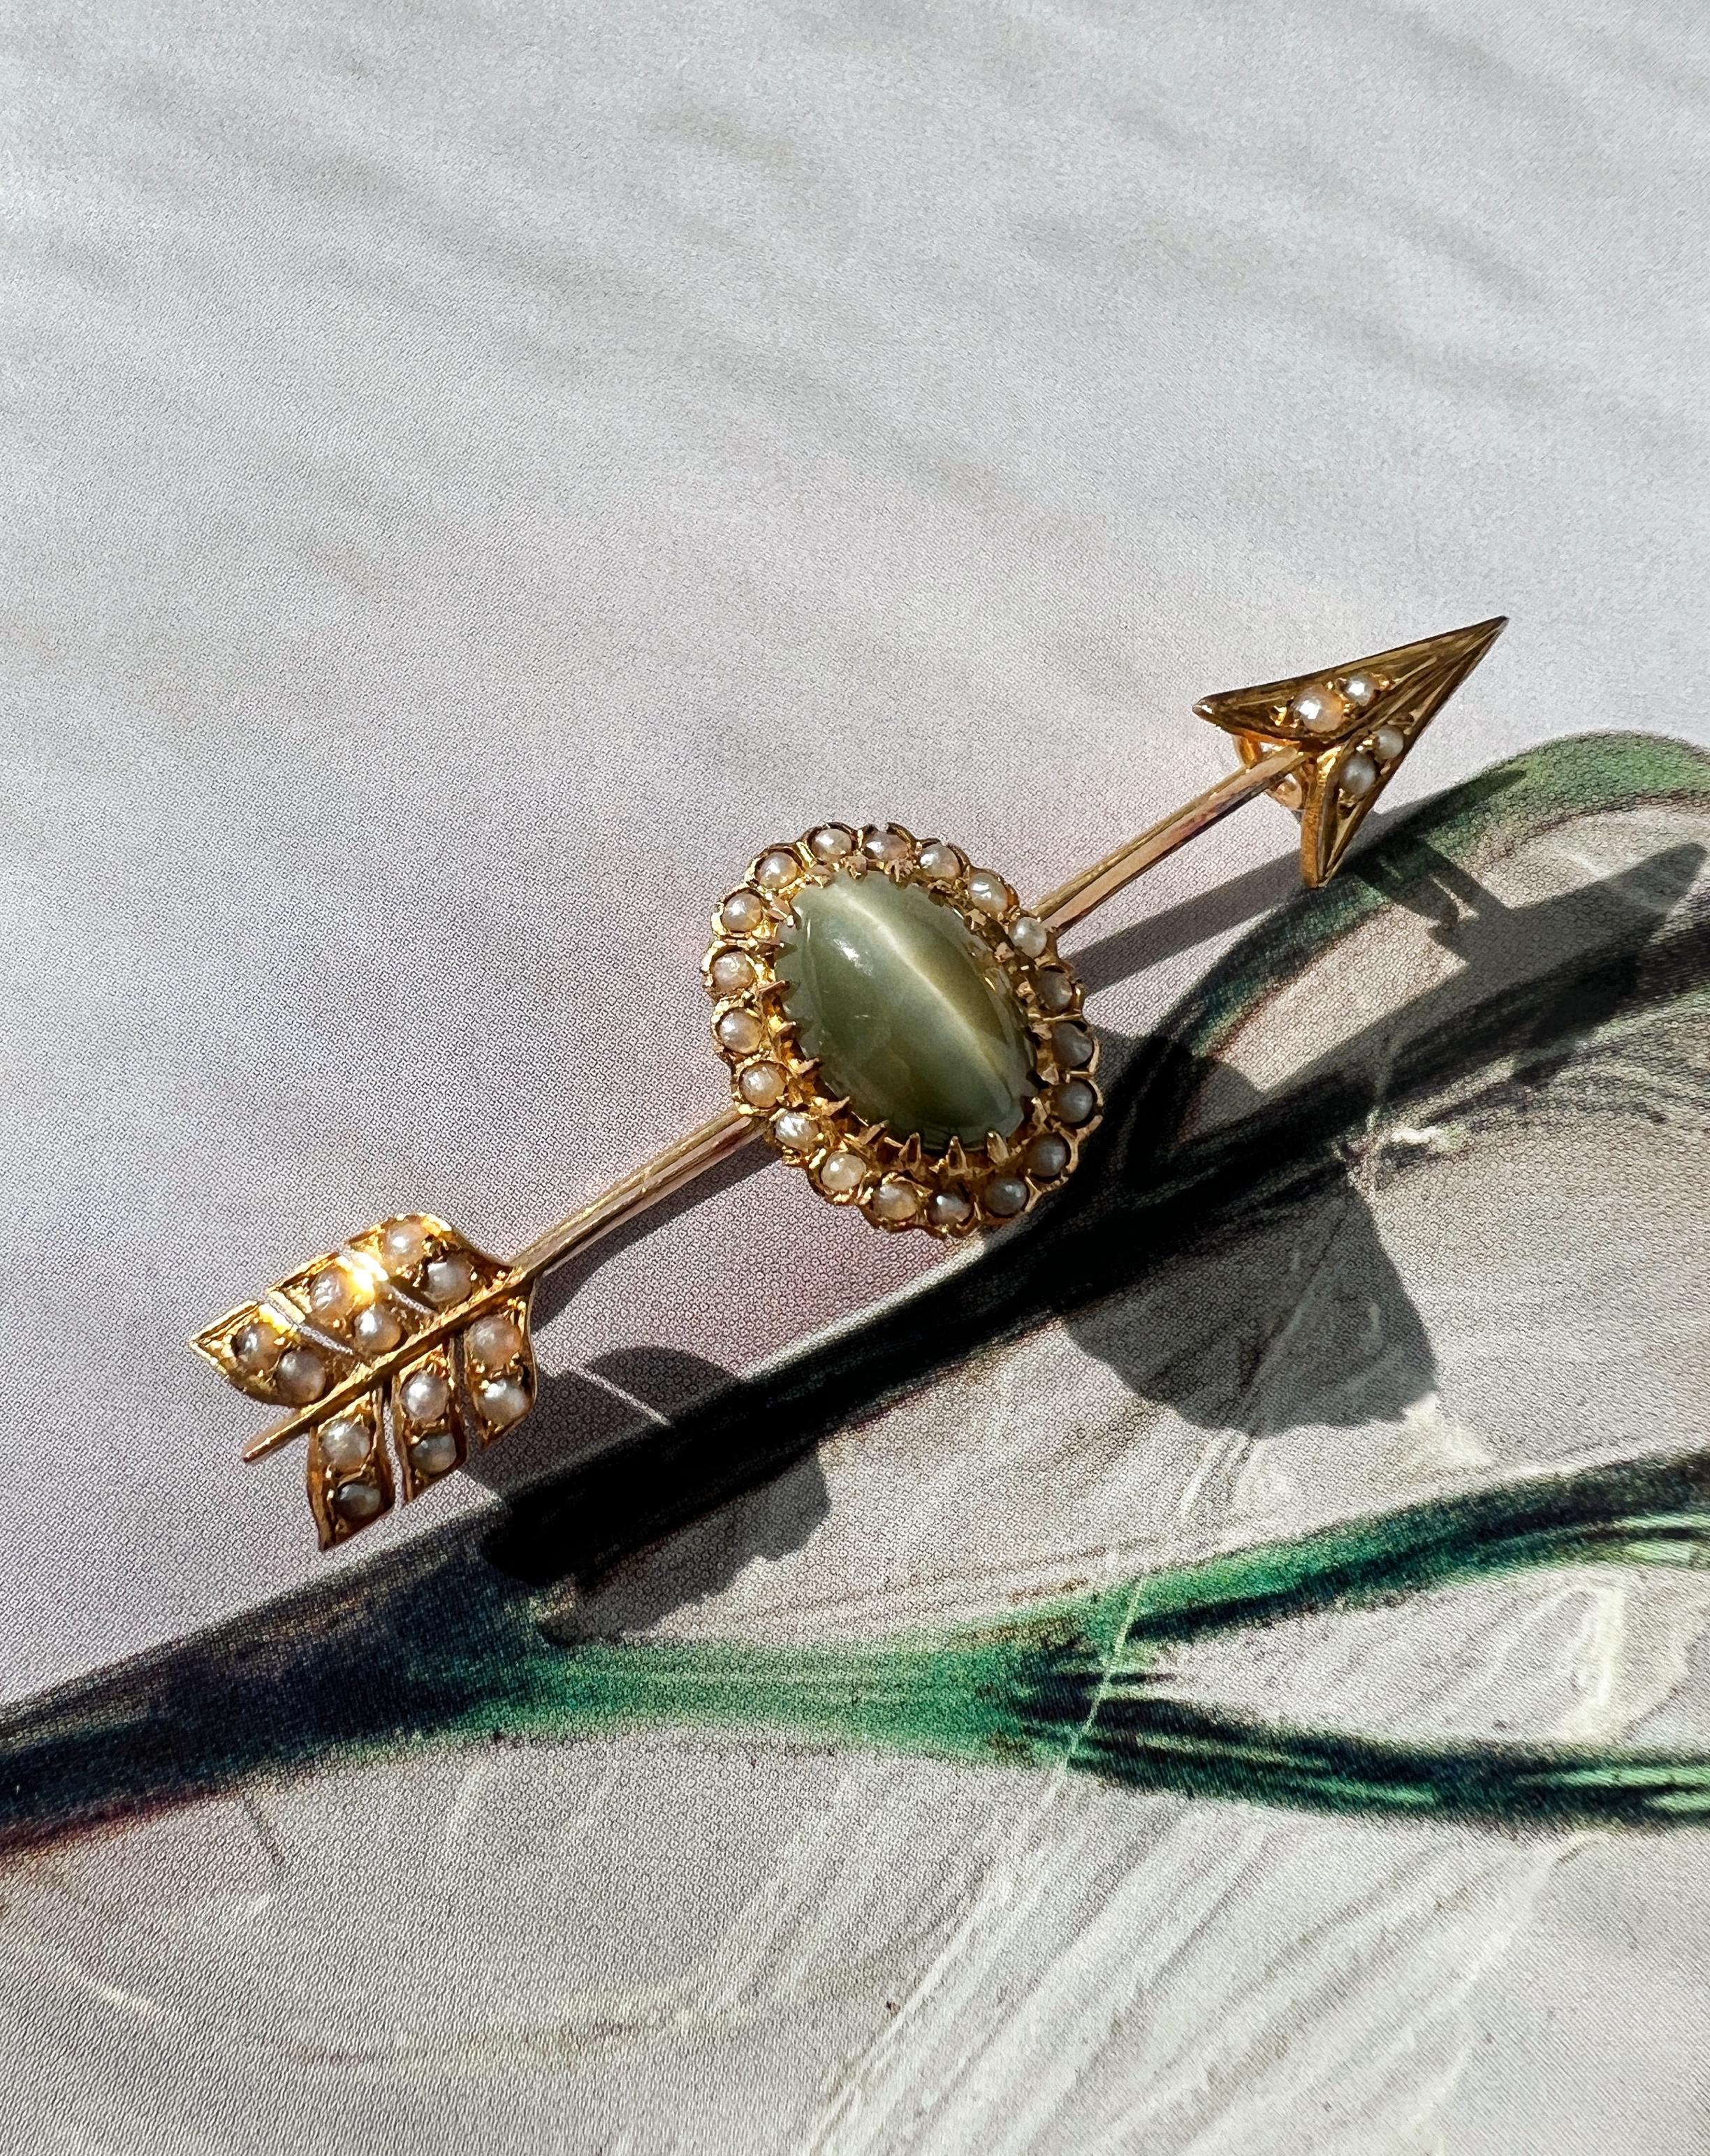 For sale a rare arrow brooch dated from the 19th century, the Victorian era. This brooch features a stunning yellowish-gray cat-eye chrysoberyl cabochon in the center: a precious phenomenon gemstone that displays a line in the center of the stone